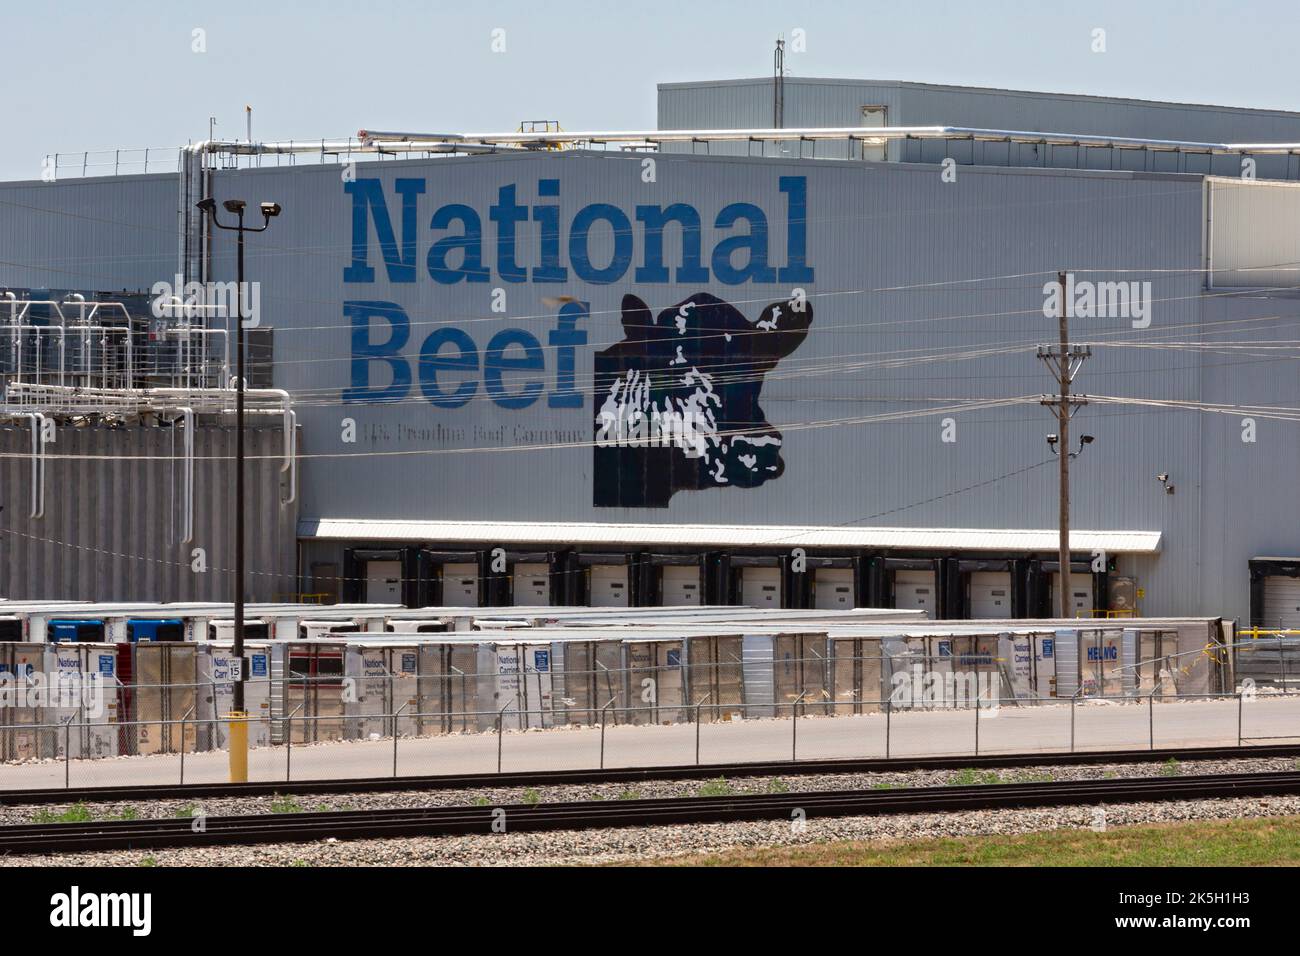 Dodge City, Kansas - The National Beef plant. National Beef is one of the four dominant beef processing companies in the U.S. It is owned by the large Stock Photo